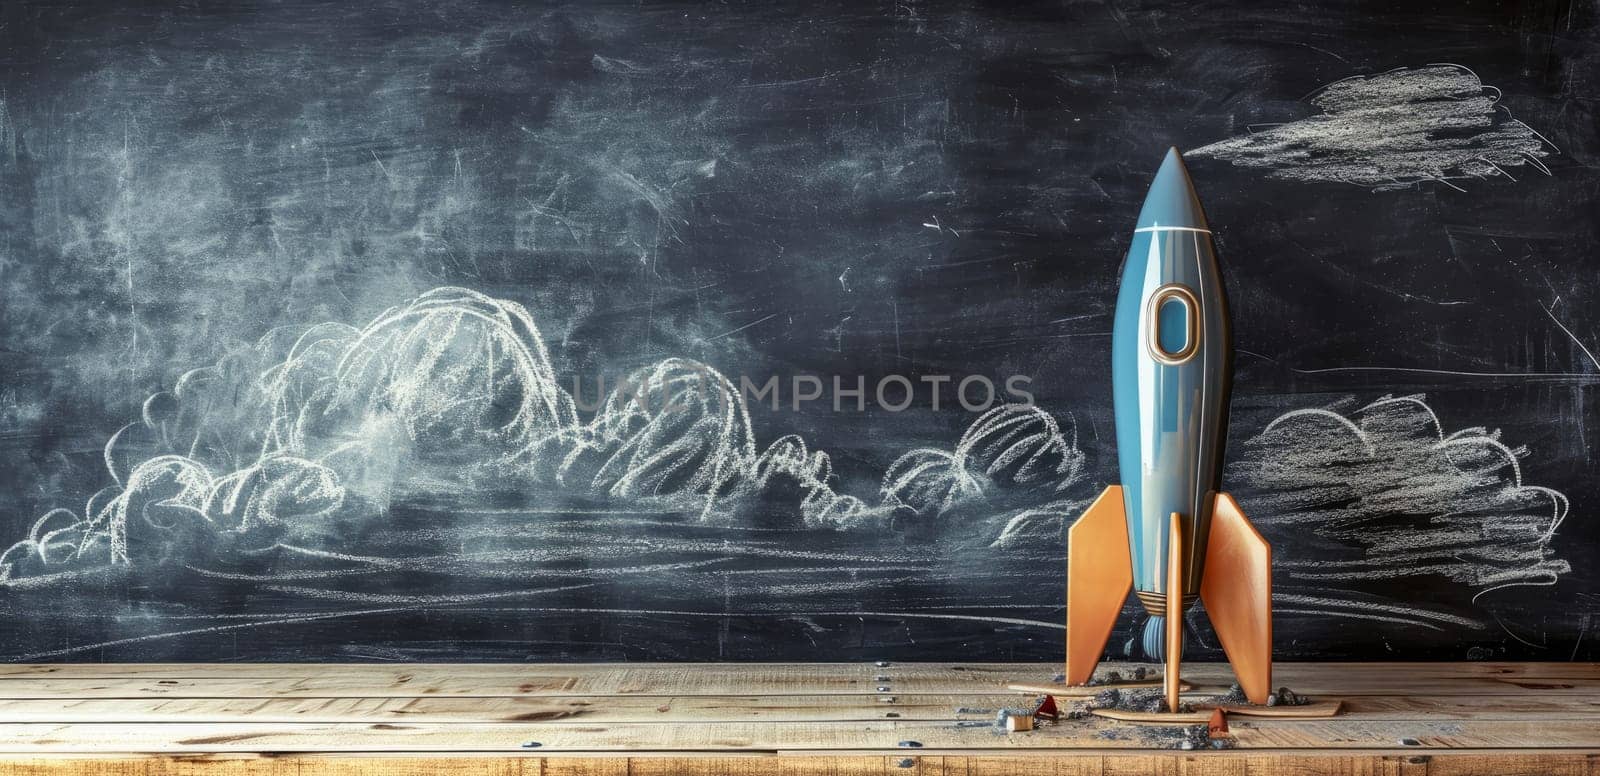 Rocket ship model on wooden table against chalkboard with cloud drawings by ailike